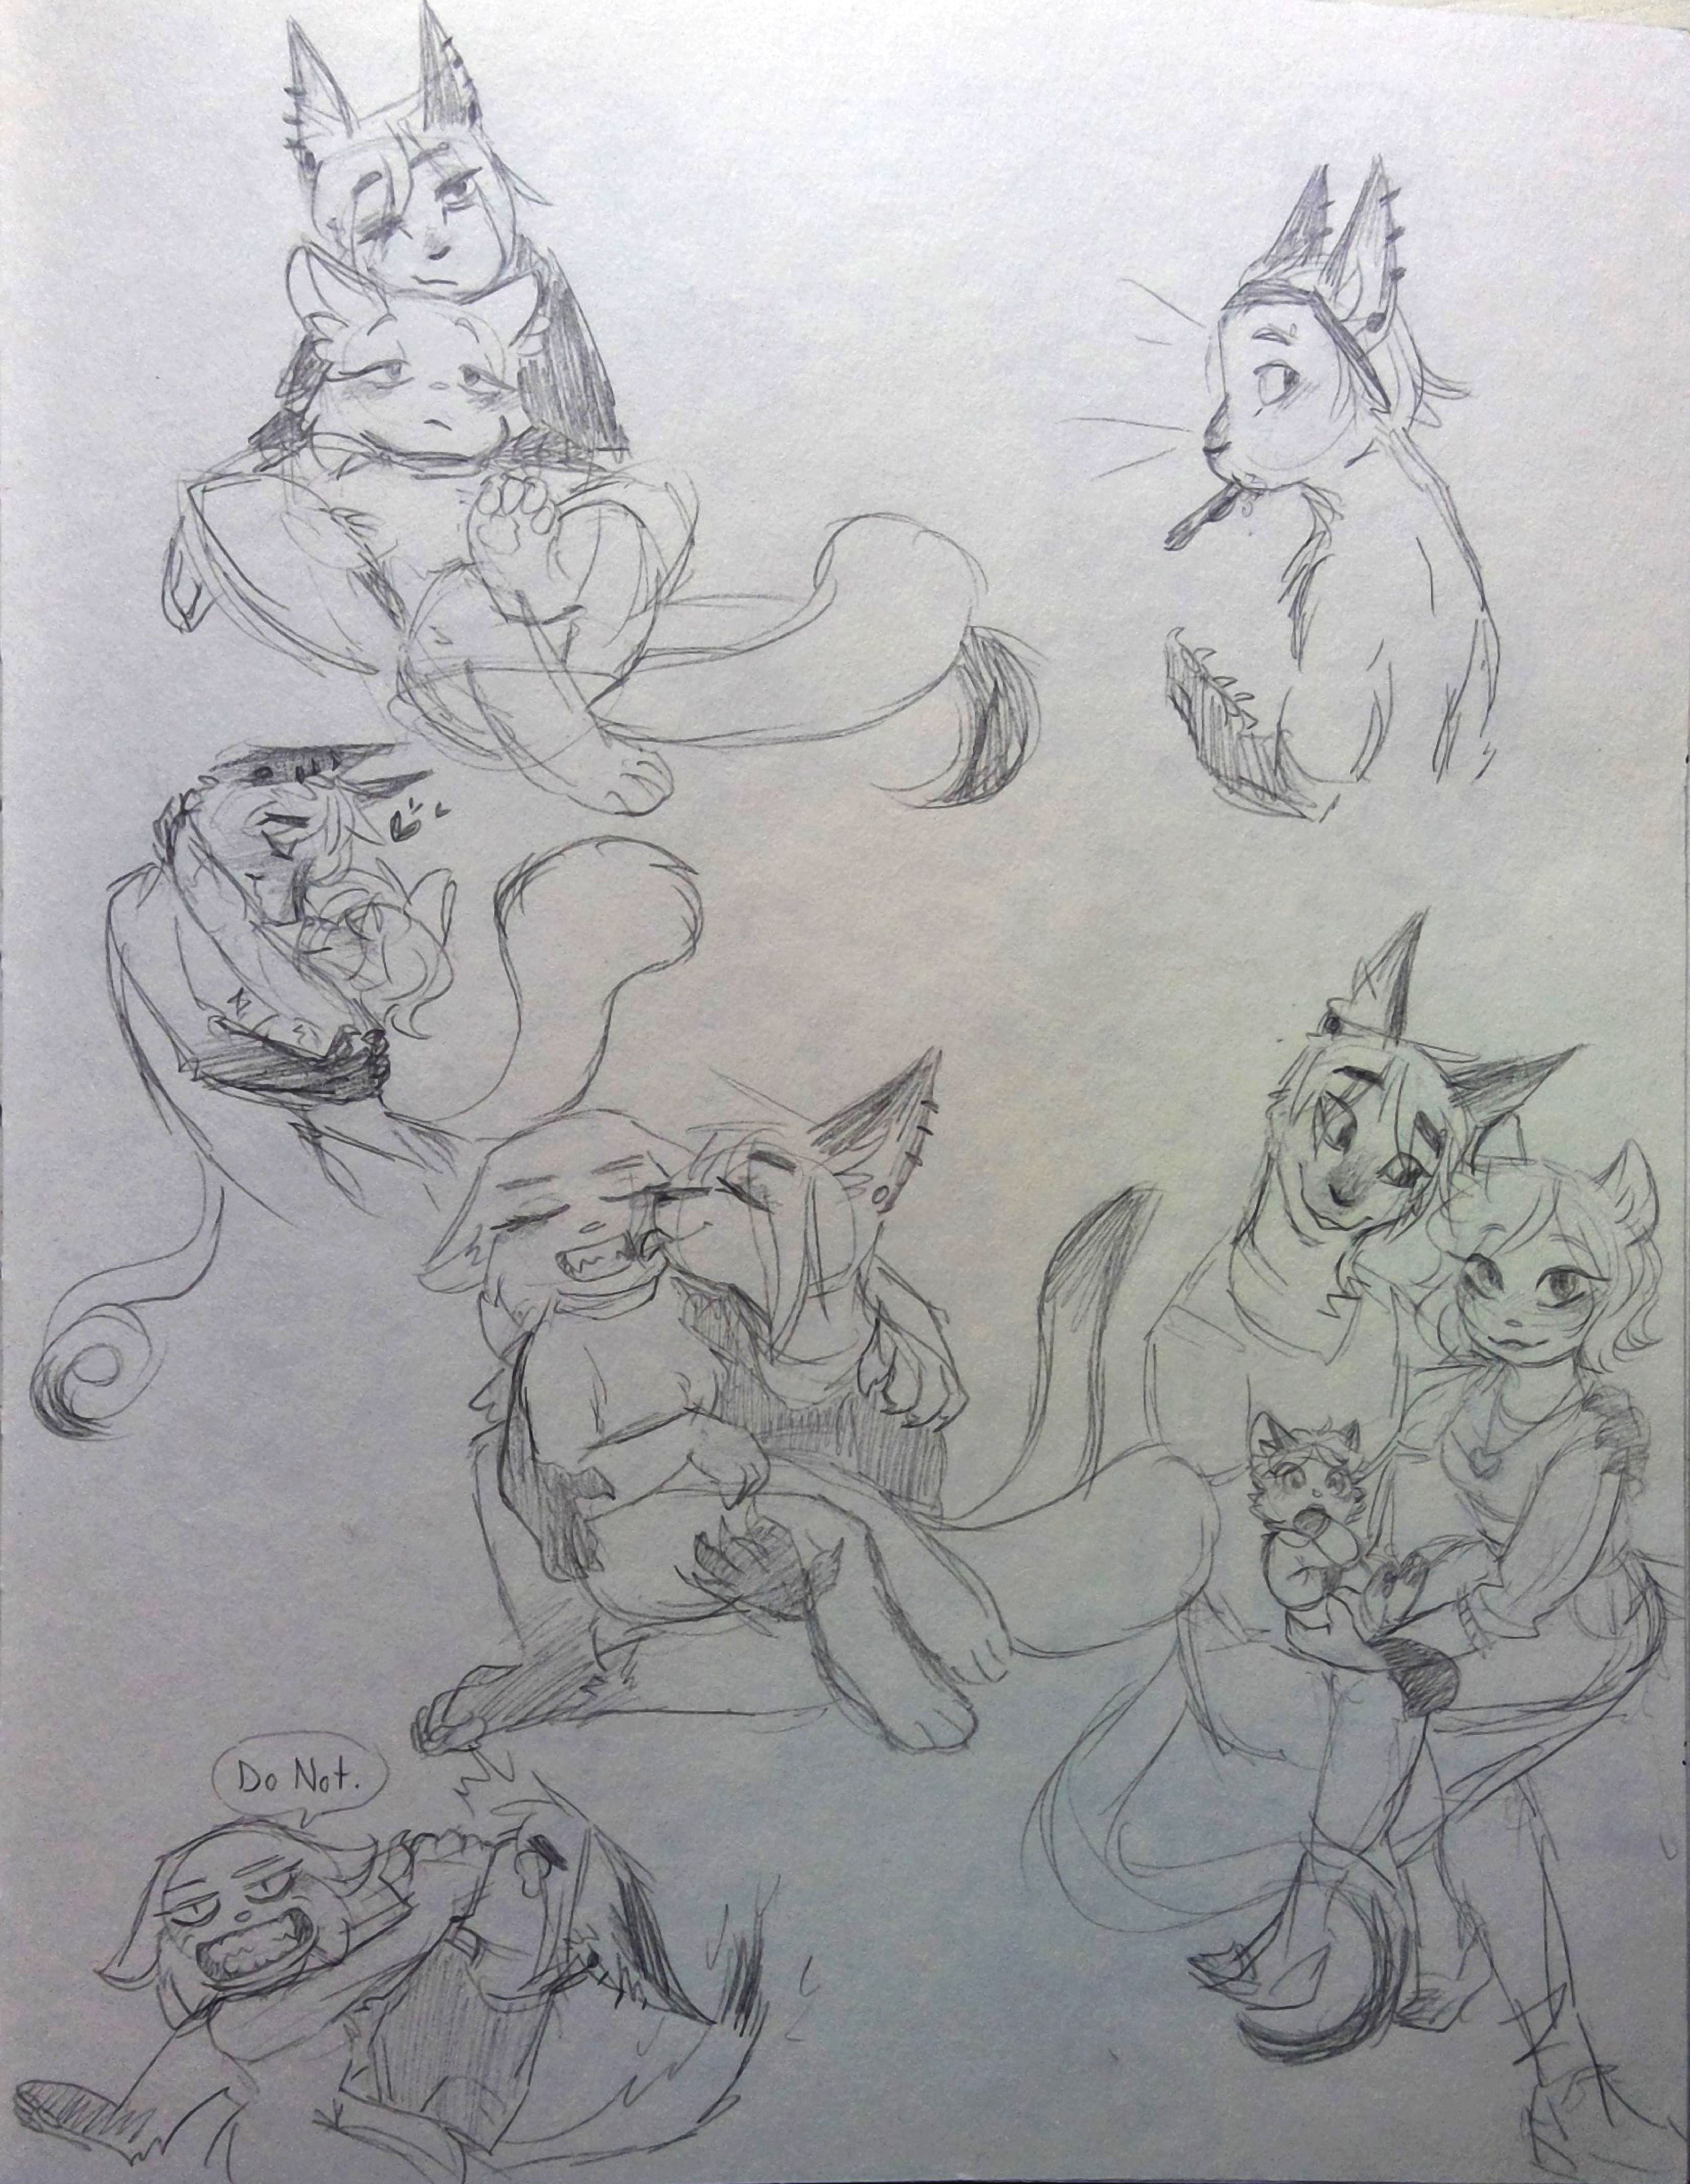 Candybooru image #14467, tagged with Augustus AugustusxLucy Lucy Officerfurry_(Artist) kittens sketch